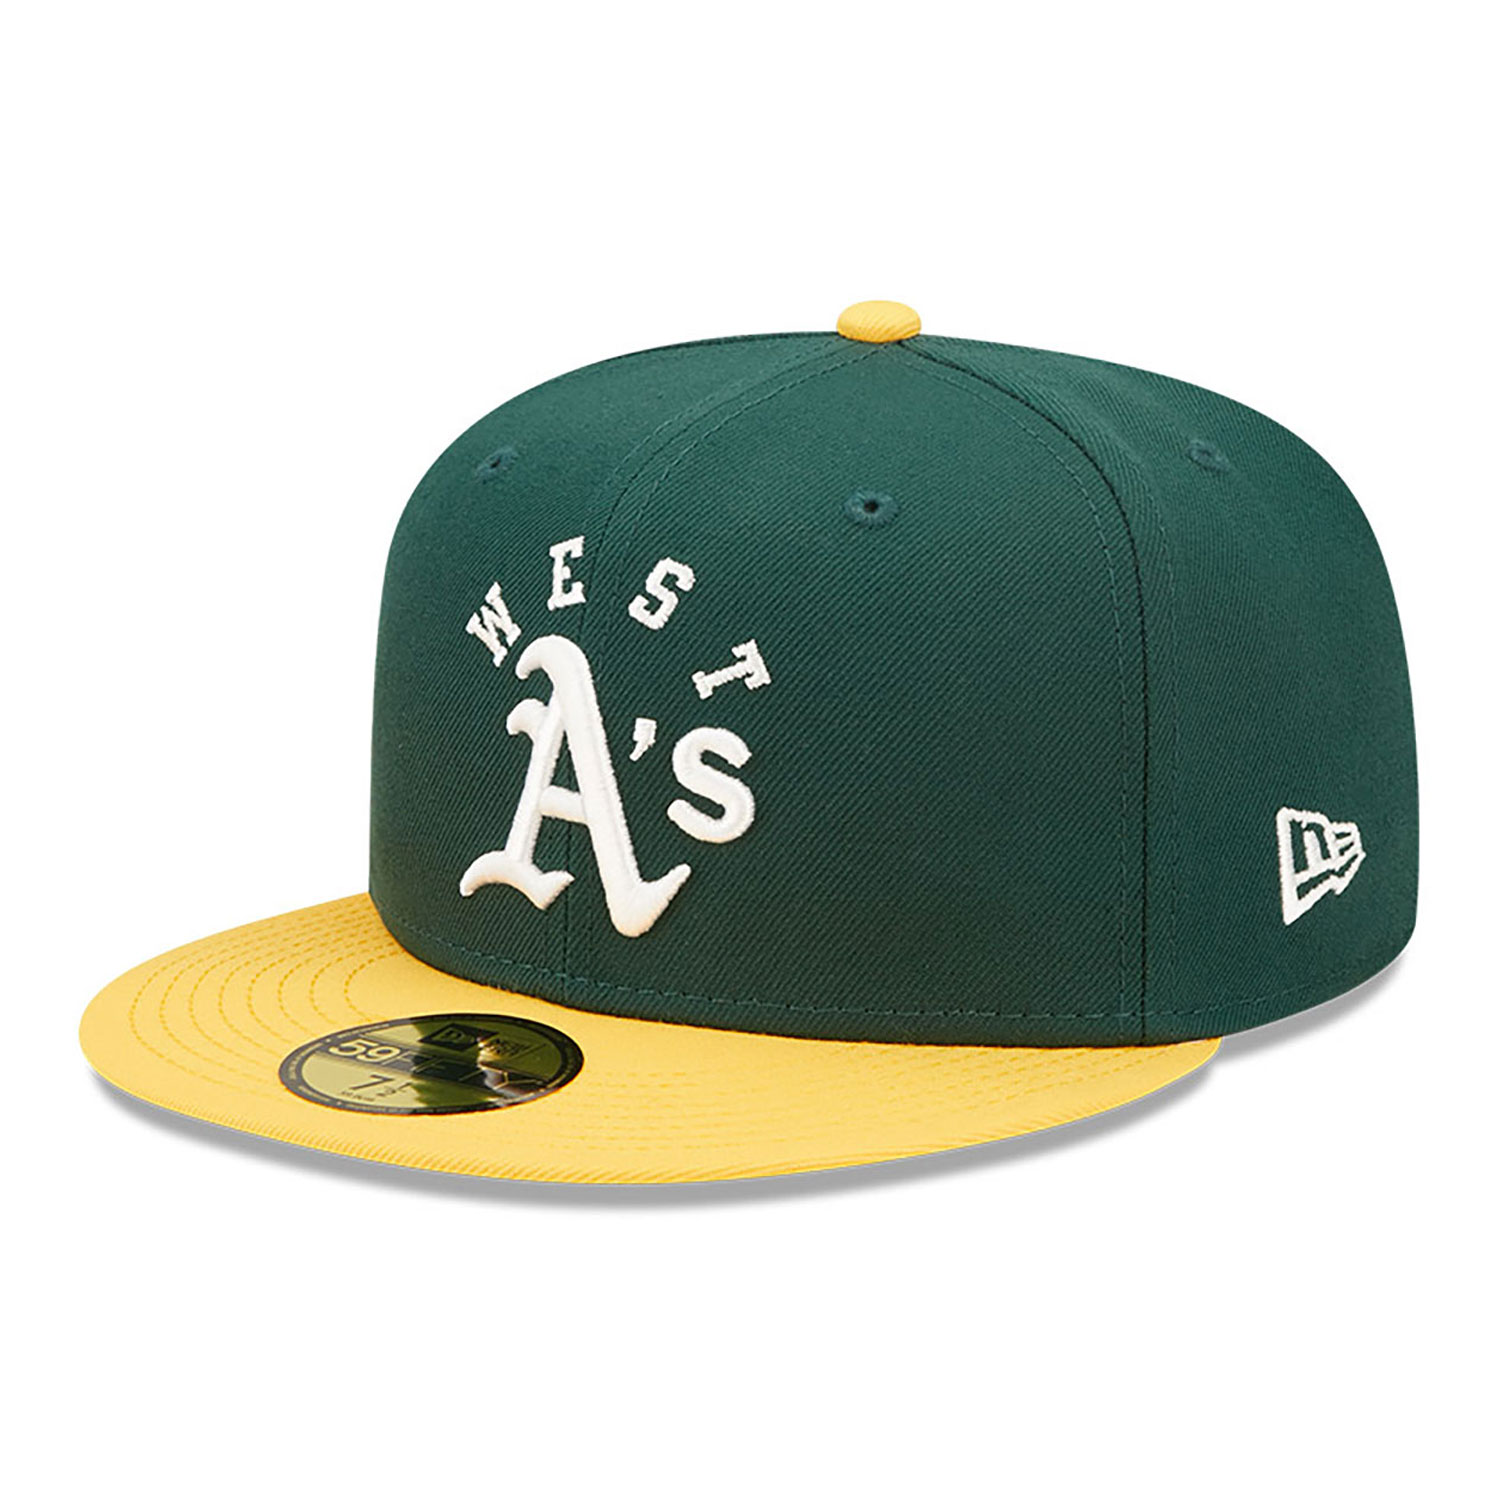 Official New Era Team League Oakland Athletics 59FIFTY Fitted Cap C17 ...